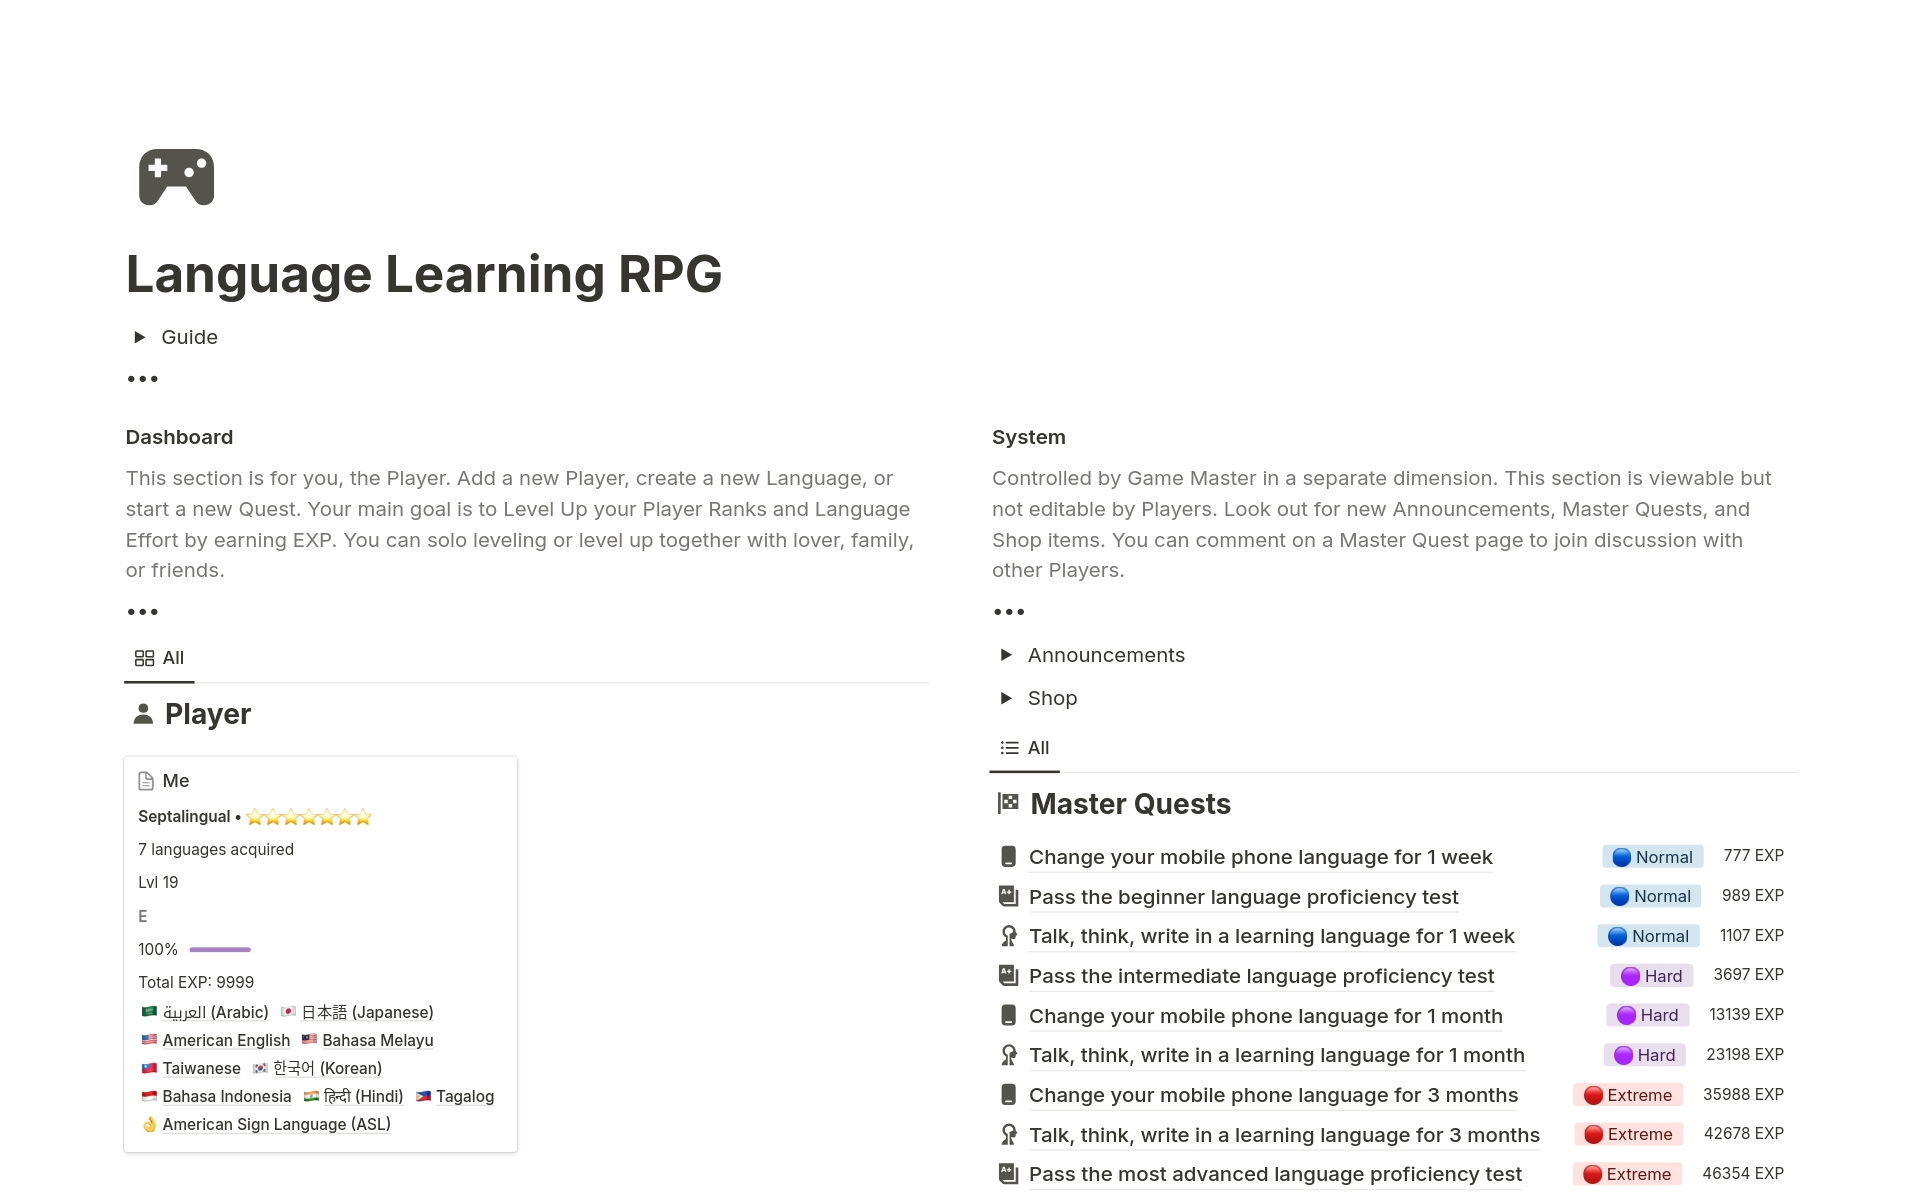 LLRPG is a simple yet practical language-learning productivity game system in Notion.